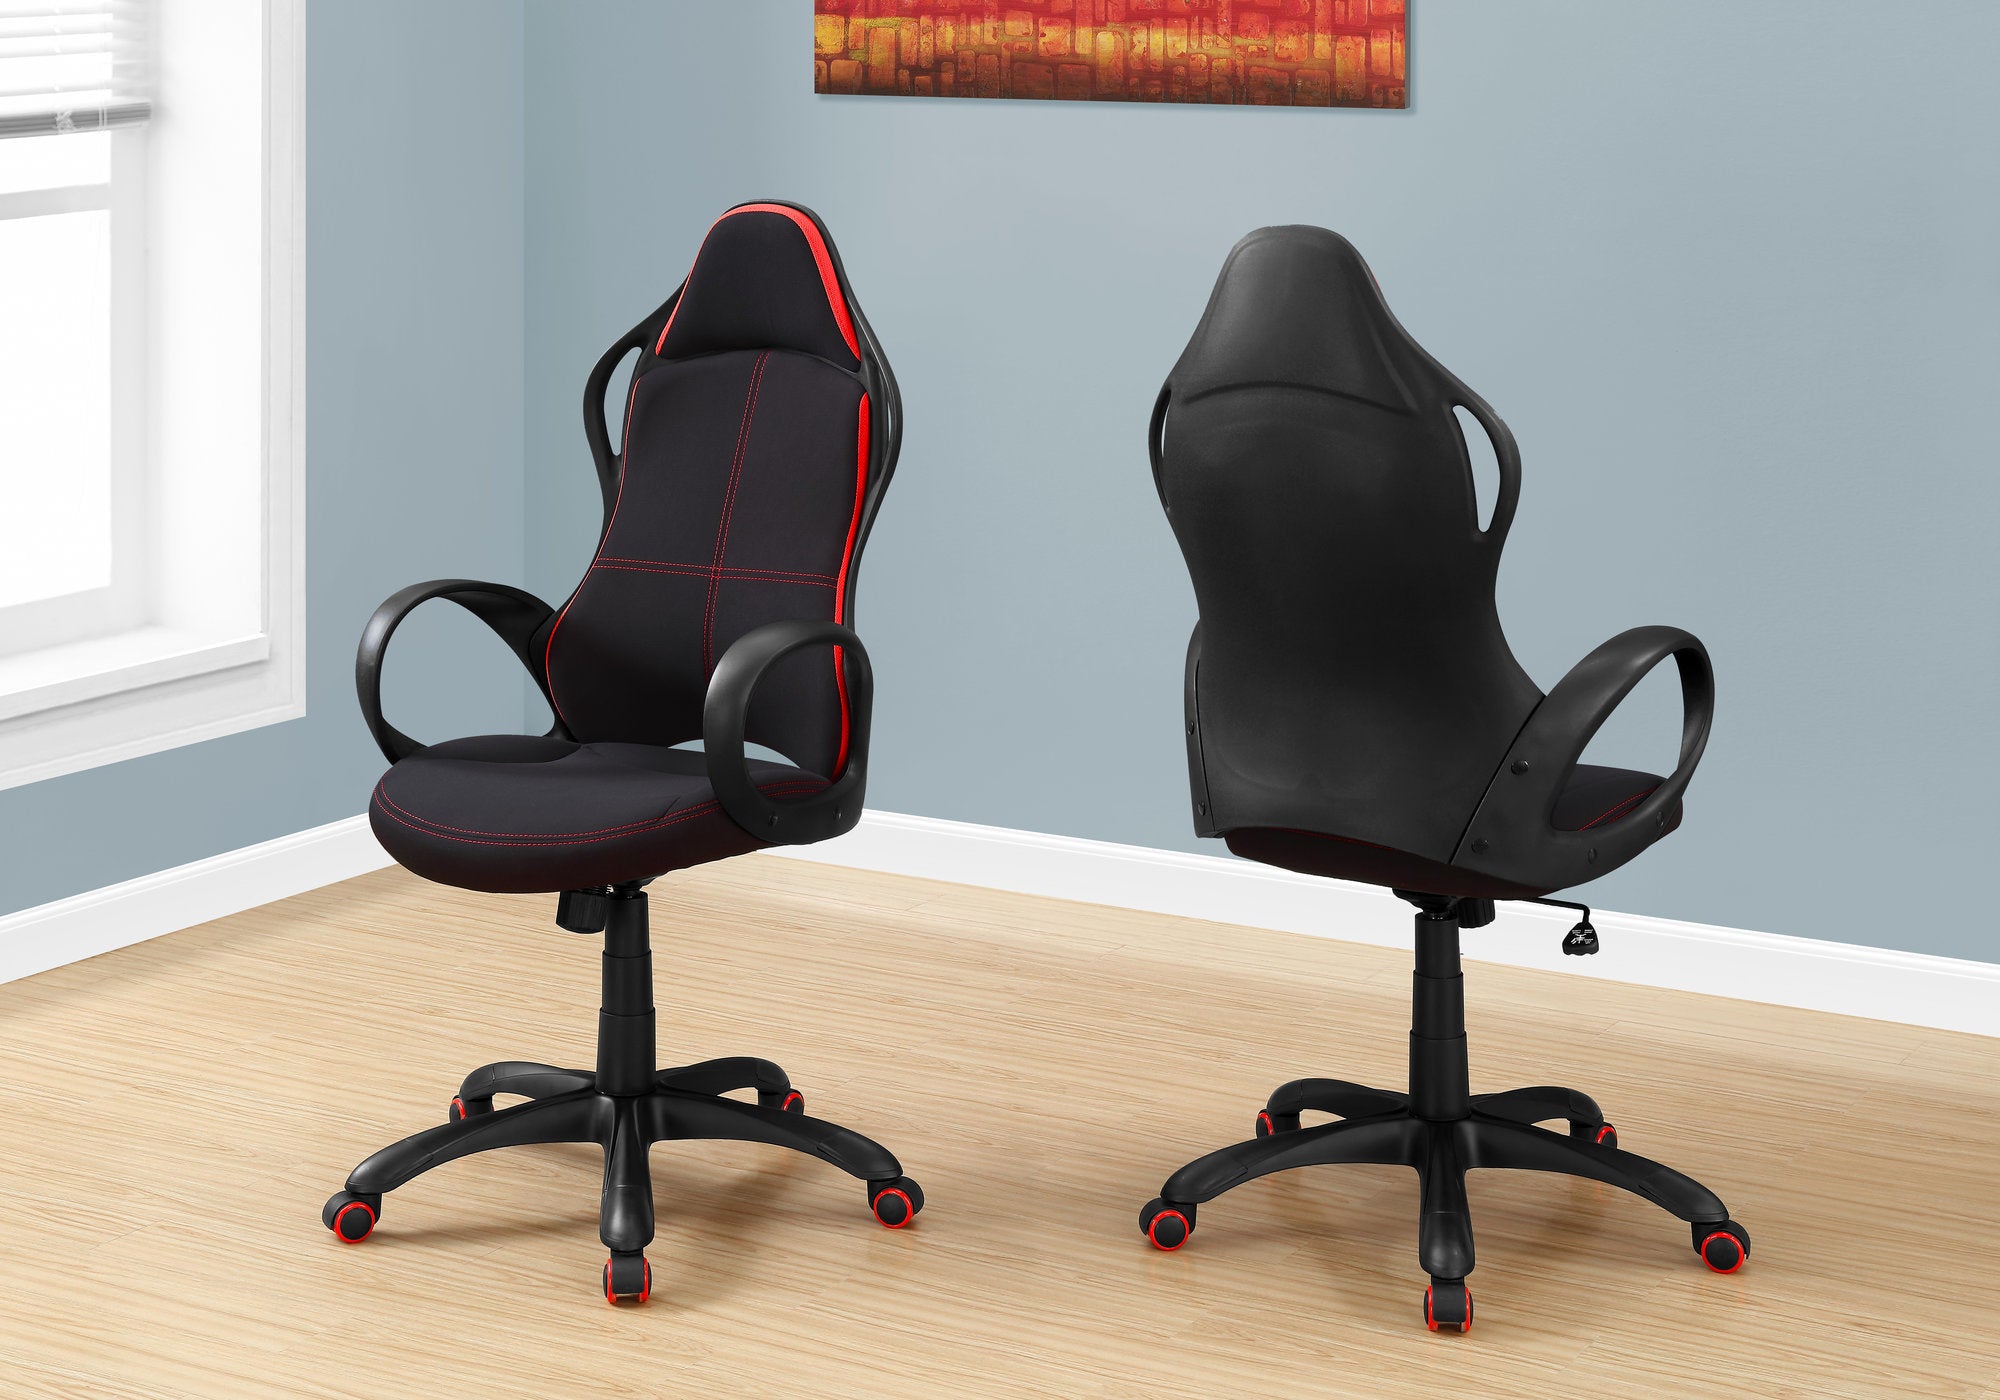 MN-737259    Office Chair, Adjustable Height, Swivel, Ergonomic, Armrests, Computer Desk, Office, Metal Base, Fabric, Black, Red, Contemporary, Modern